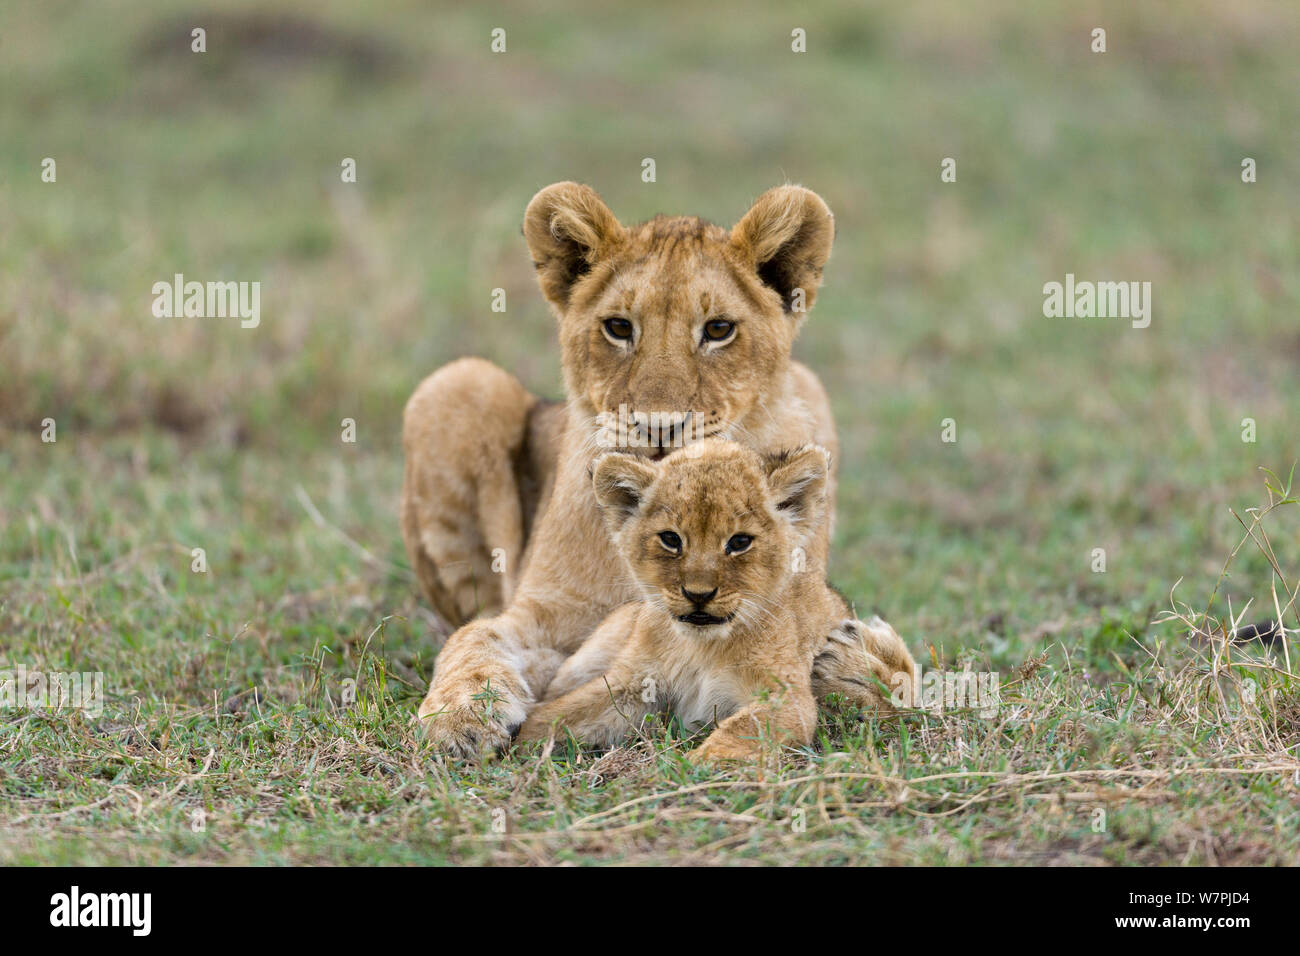 Lion (Panthera leo), and old and a young cub resting together, Masai-Mara game reserve, Kenya Stock Photo